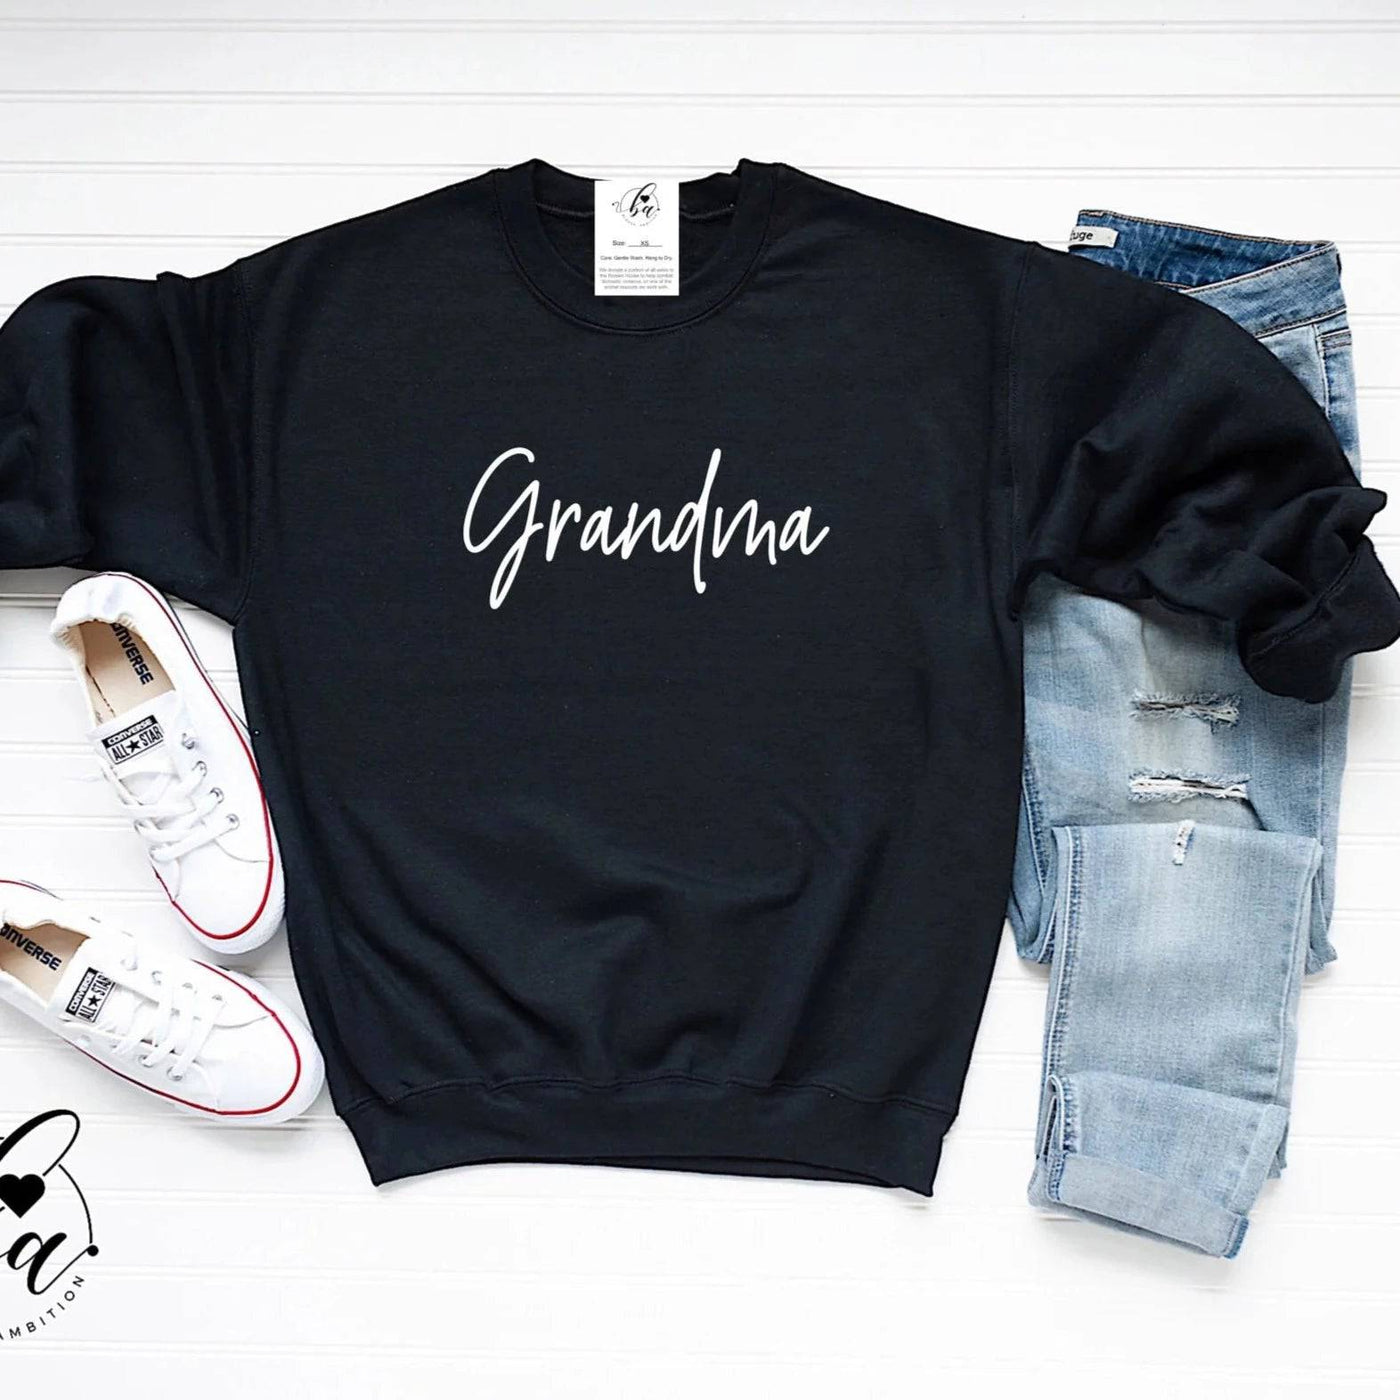 Grandma Crewneck Blonde Ambition,The Local Space, Local Canadian Brands